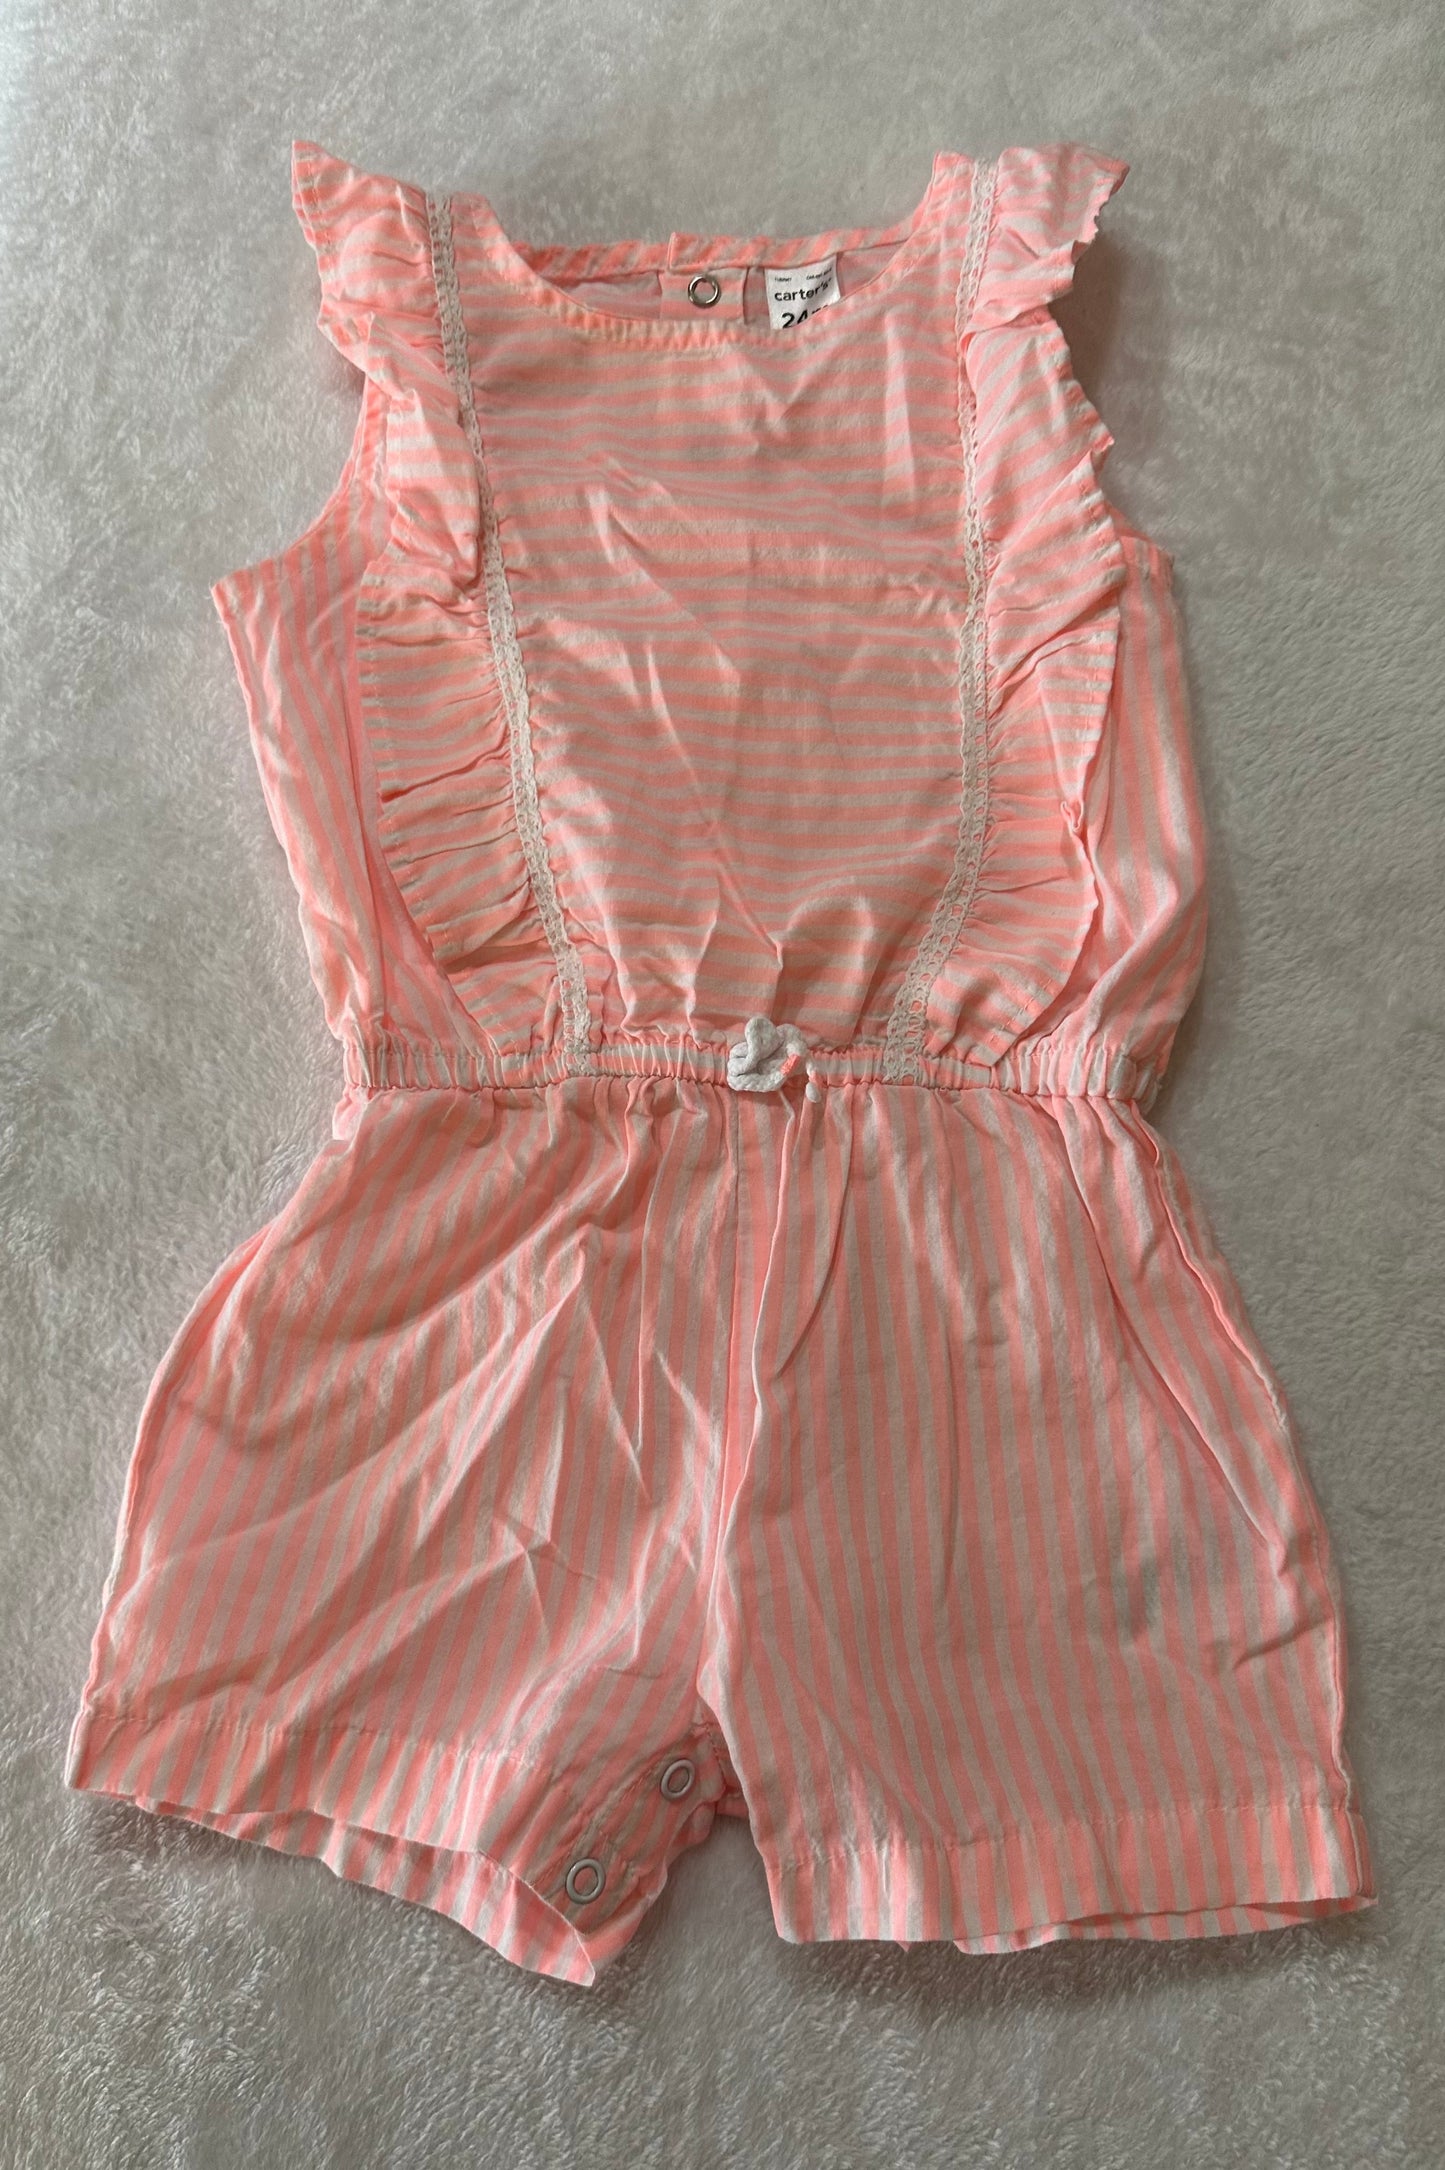 Girls 24 months Carters romper with buttons on bottom